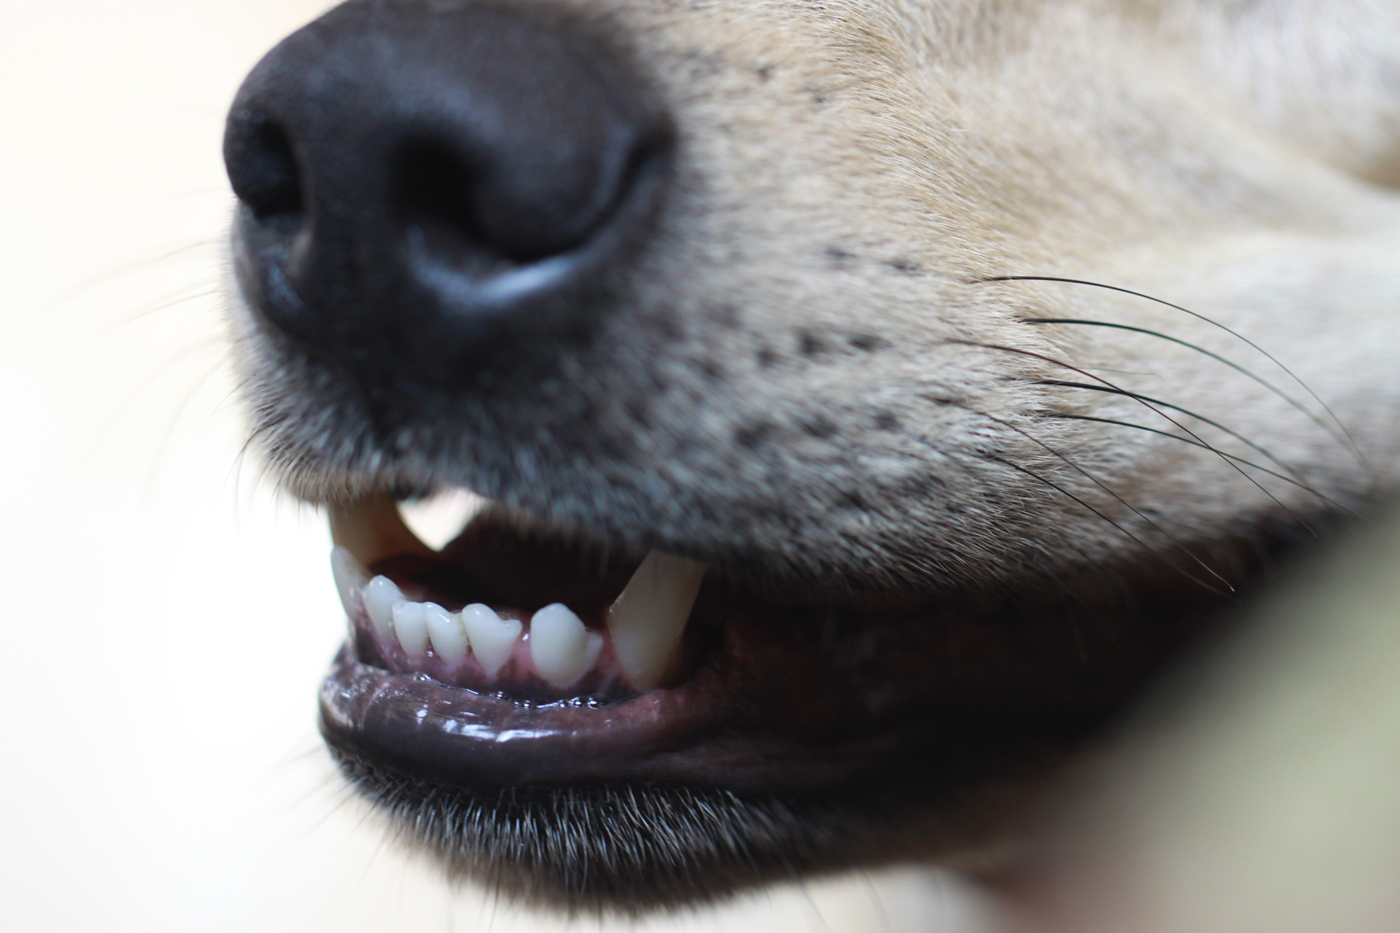 A dogs mouth slightly open revealing its bottom row of teeth